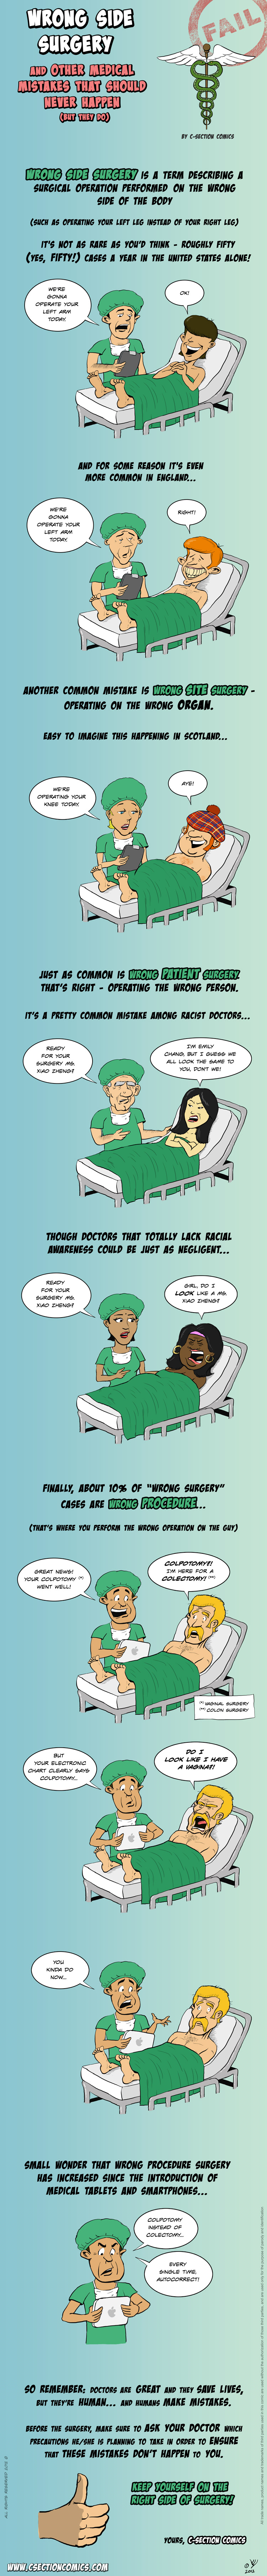 Wrong Side Surgery and Other Medical Mistakes by C-Section Comics